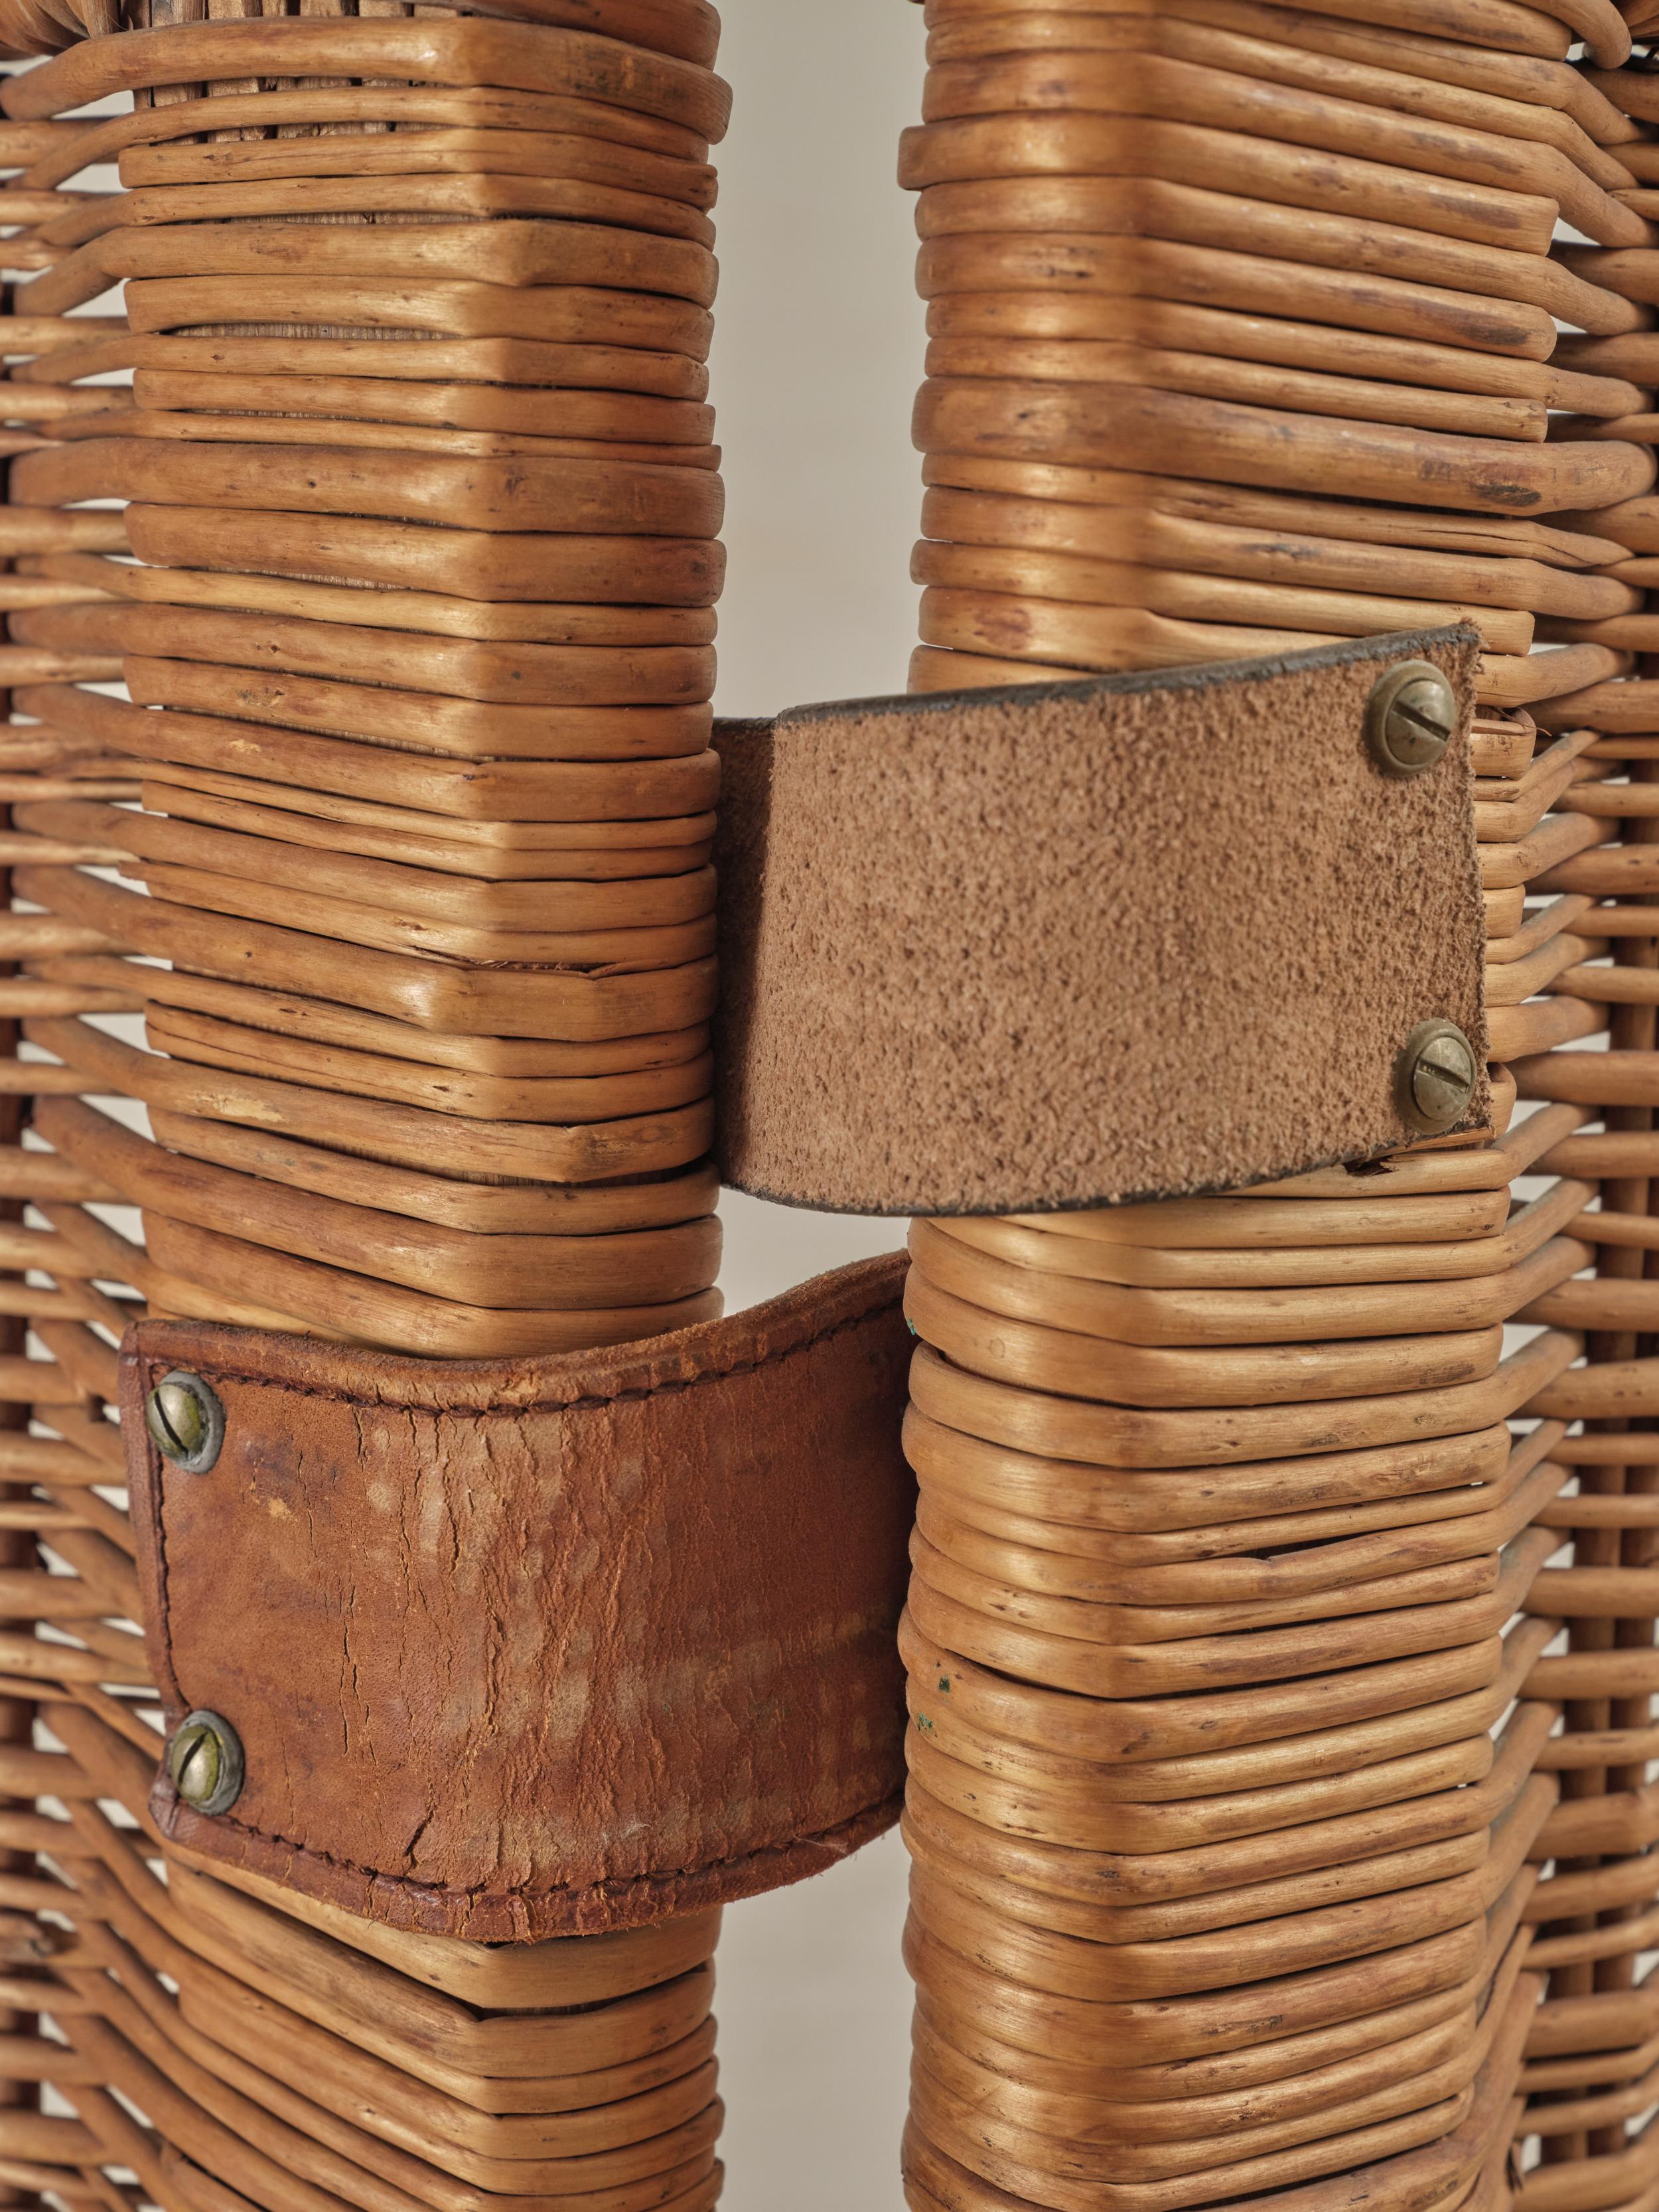 Minimalist wicker dividing Screen with leather hinges.

